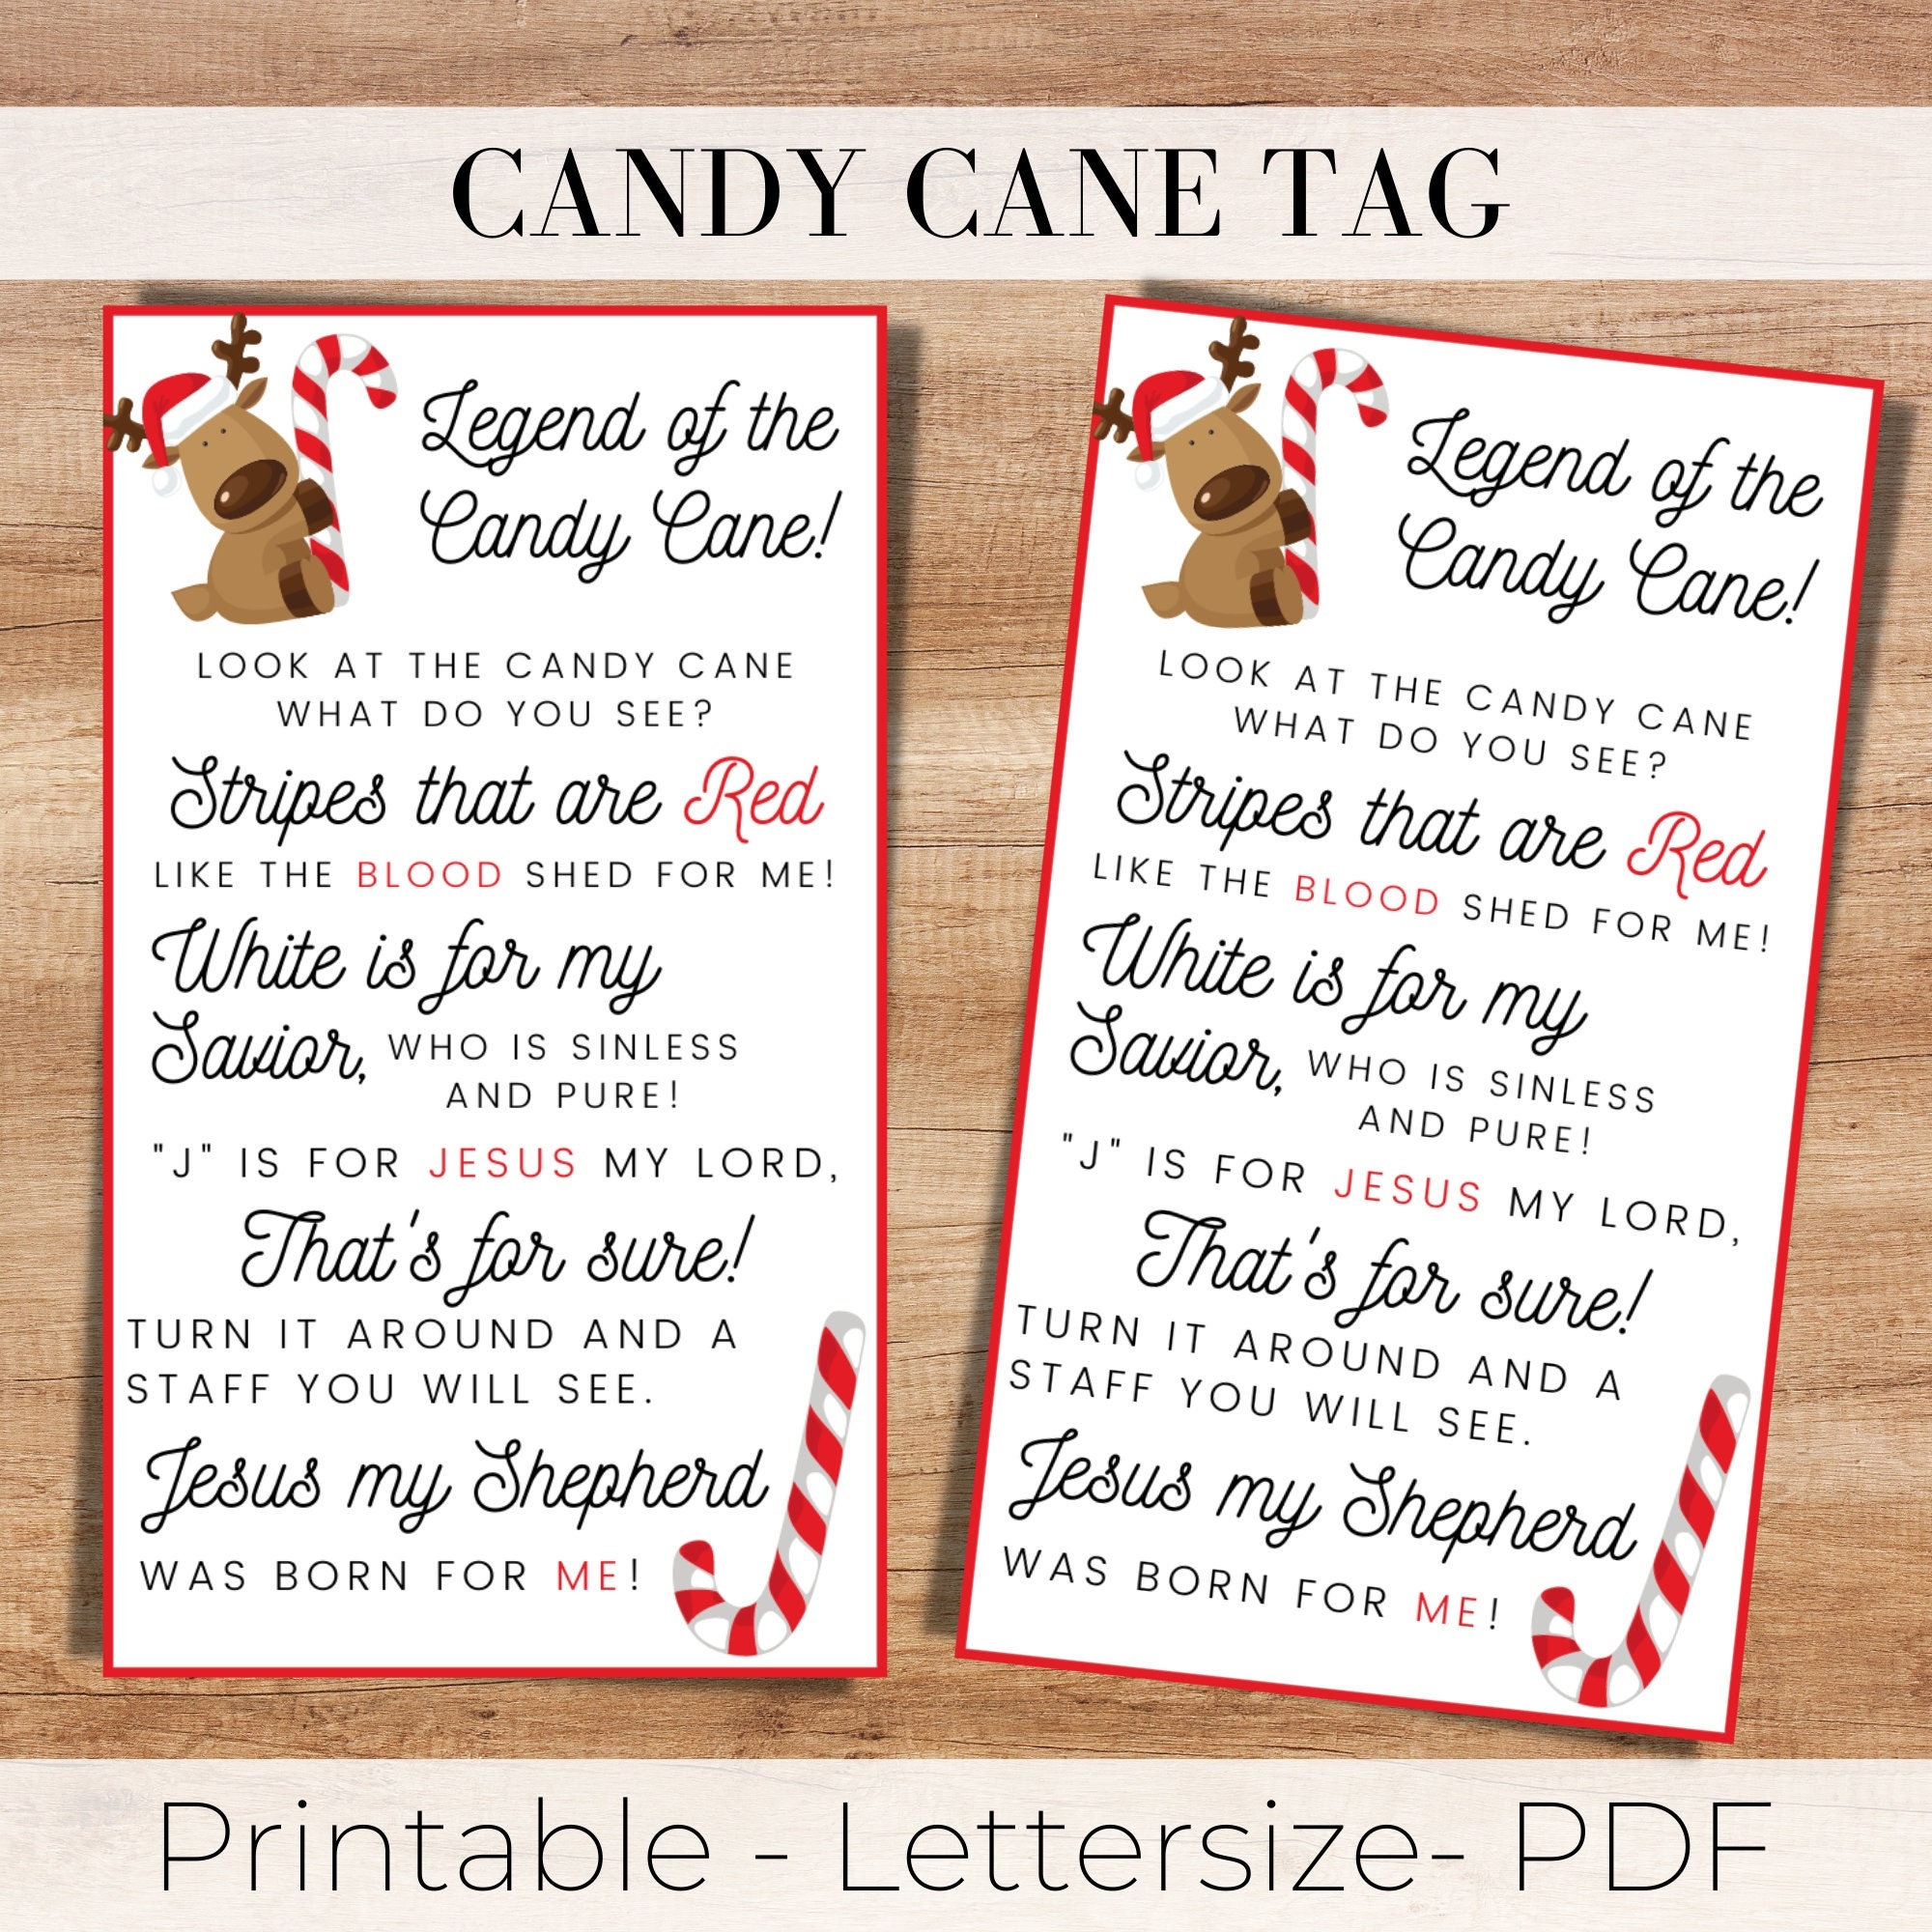 Legend Of Candy Cane Tag Christian Tag Candy Cane Tag Christmas Tag Printable Tag Treat Tag Candy Tag Candy Cane Tag Church Tag Etsy